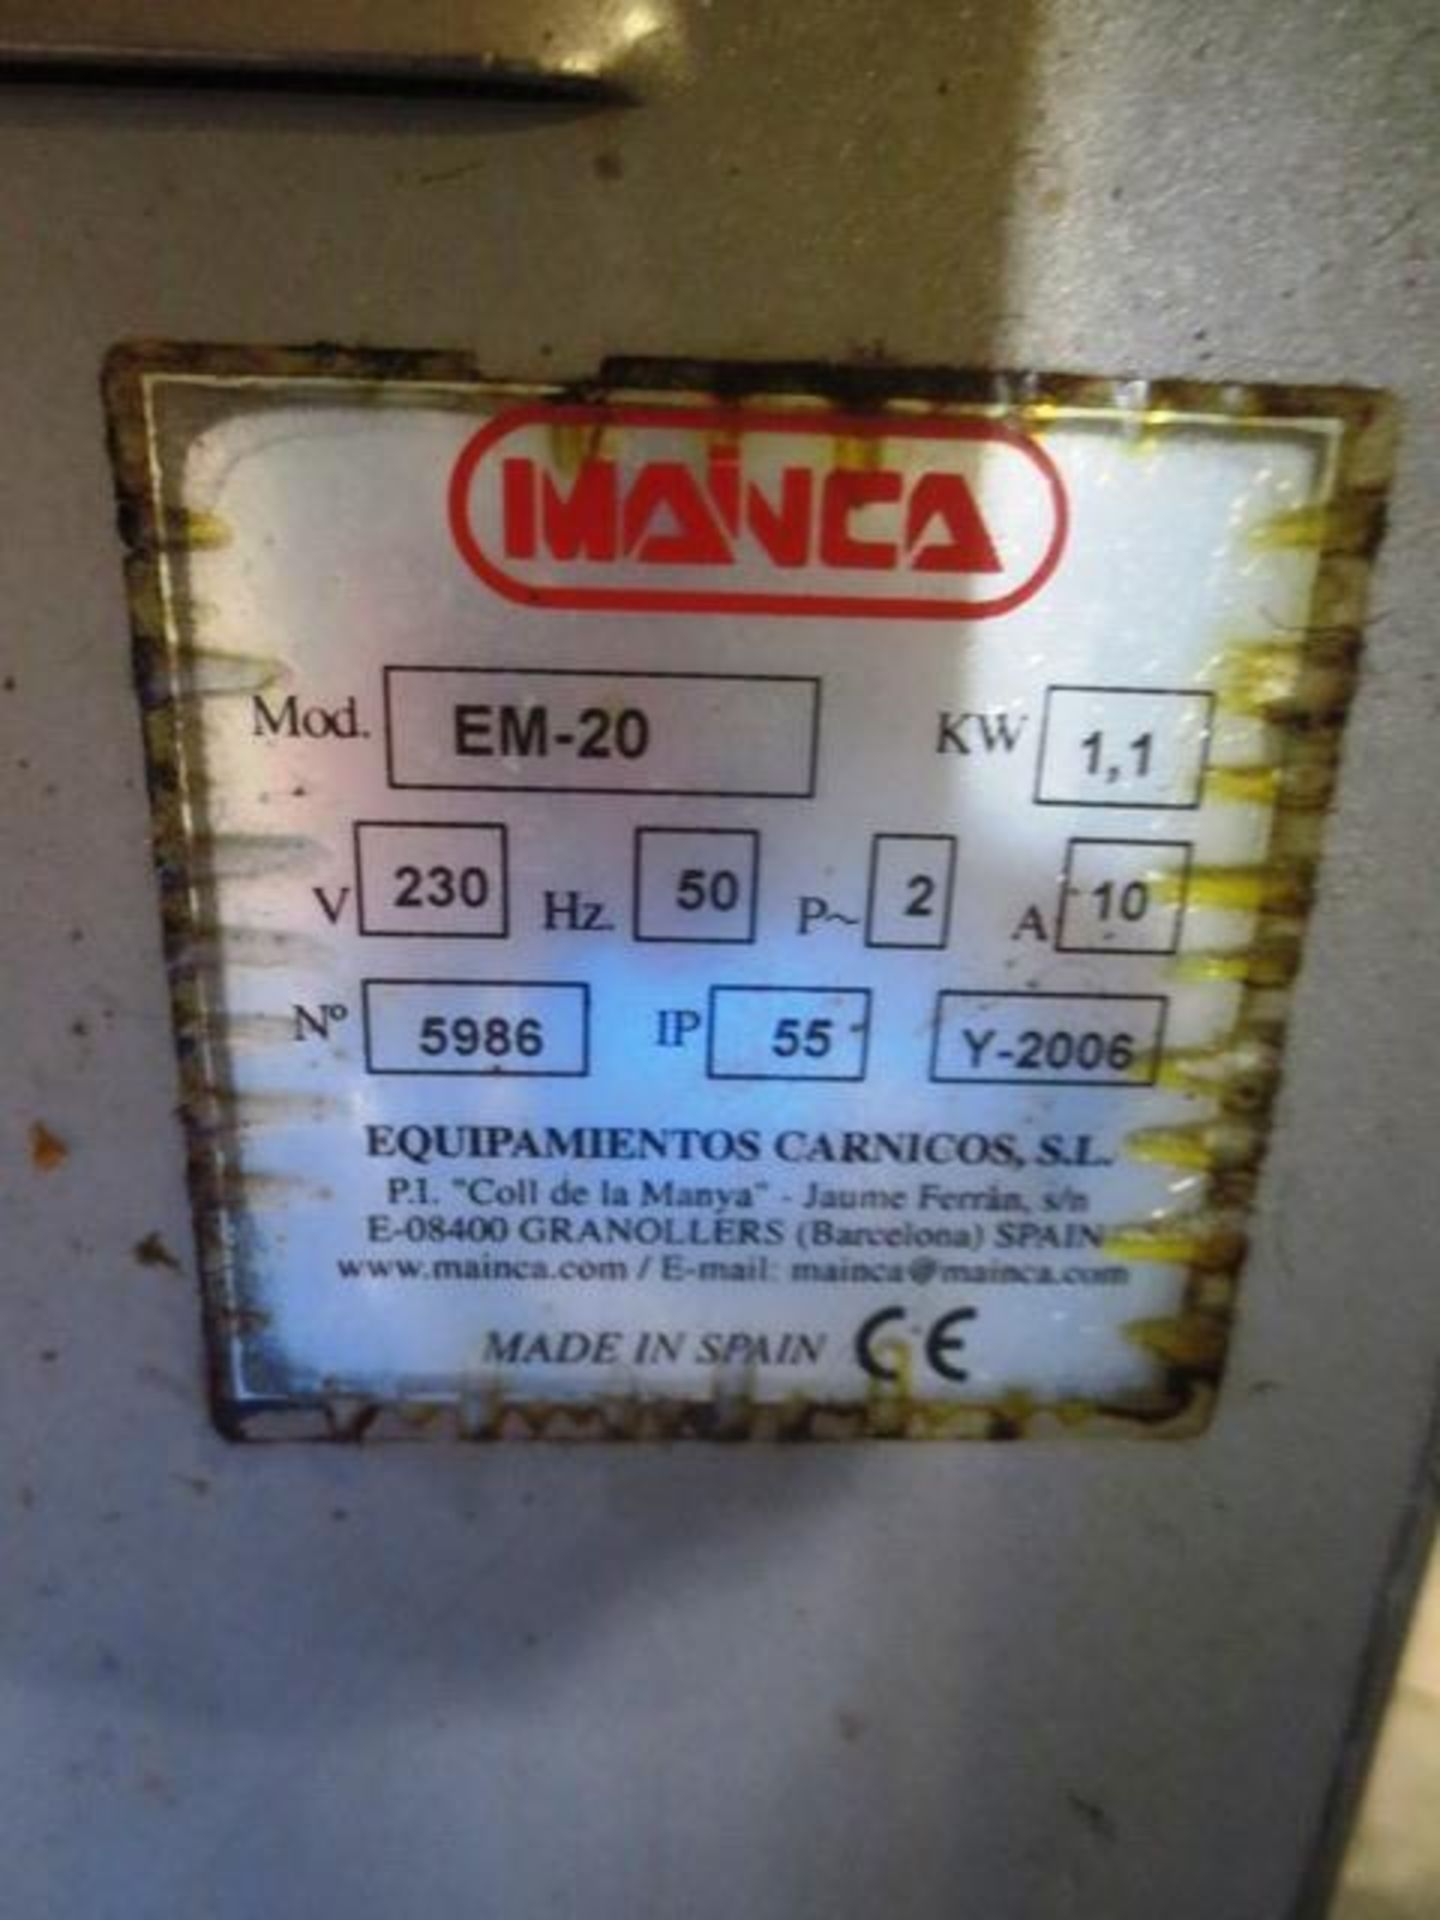 Mainca EM-20 stainless steel hydraulic sausage filler, serial no: 5986 (2006), 240v - Image 2 of 4